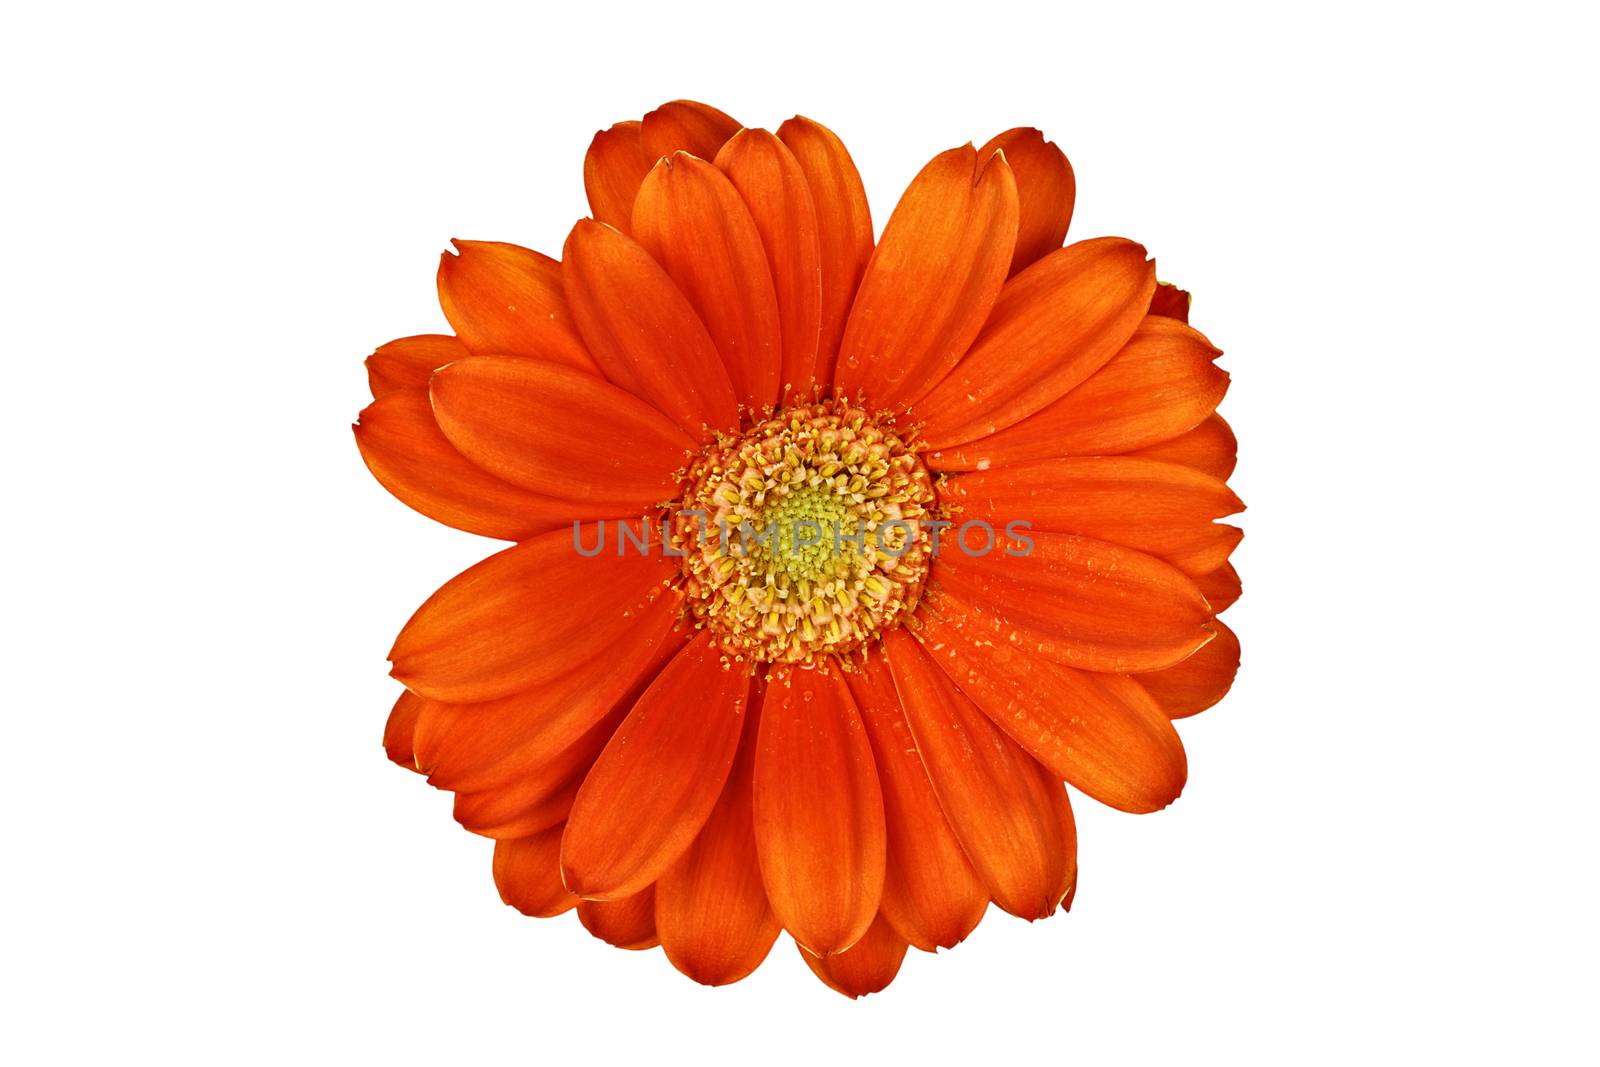 Isolated gerber daisy macro over white with clipping path included.